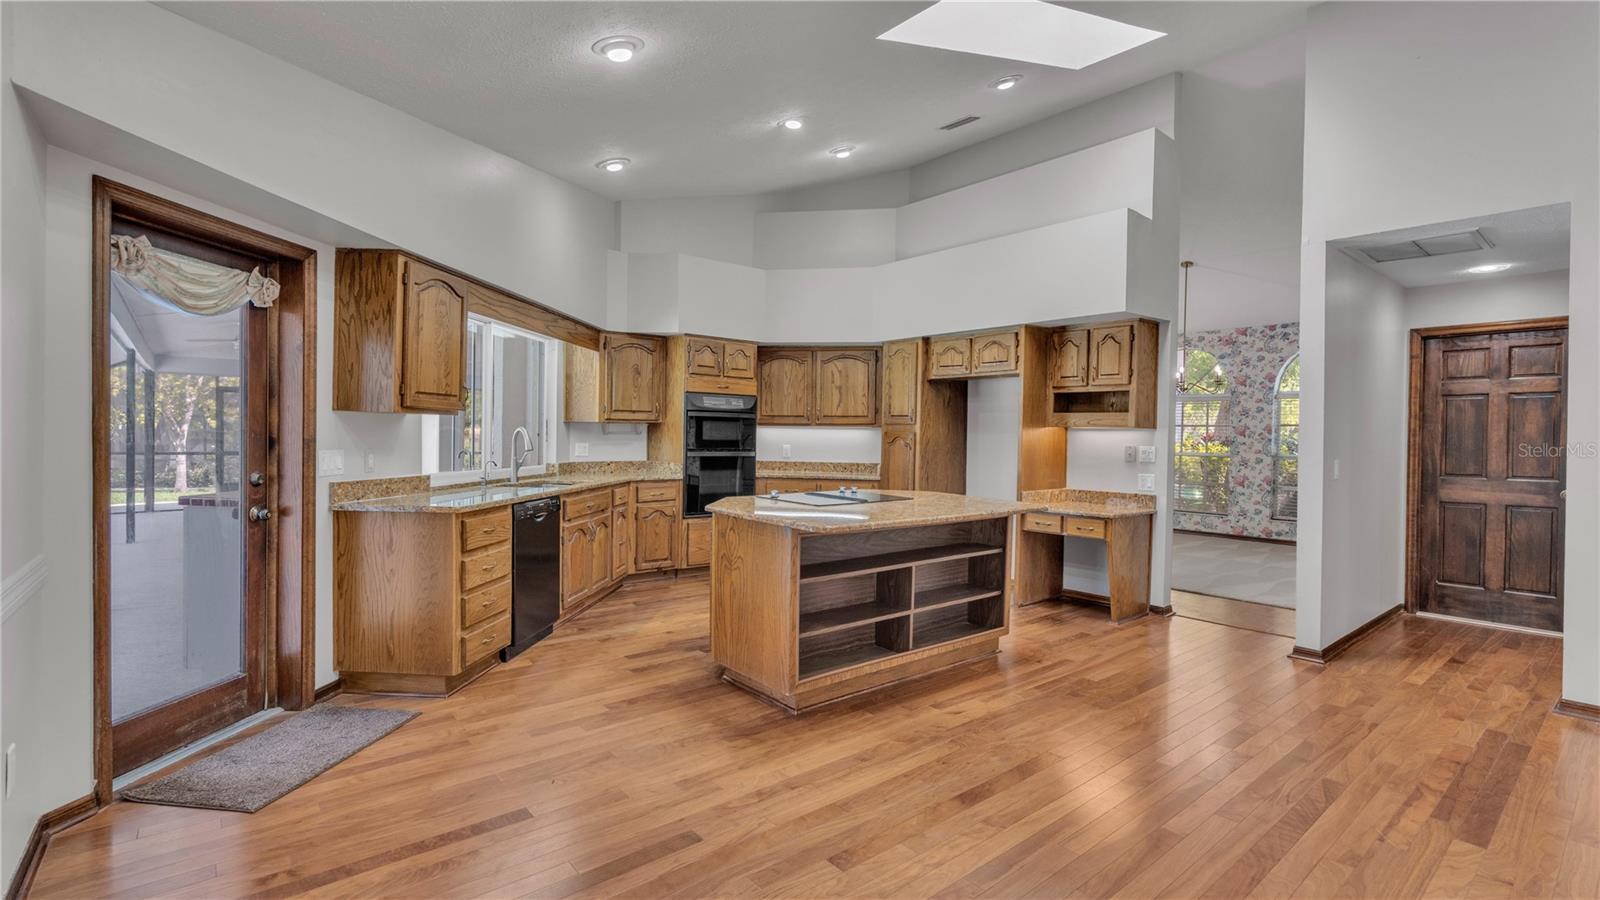 Light and bright Kitchen with solid wood cabinets and granite counter's